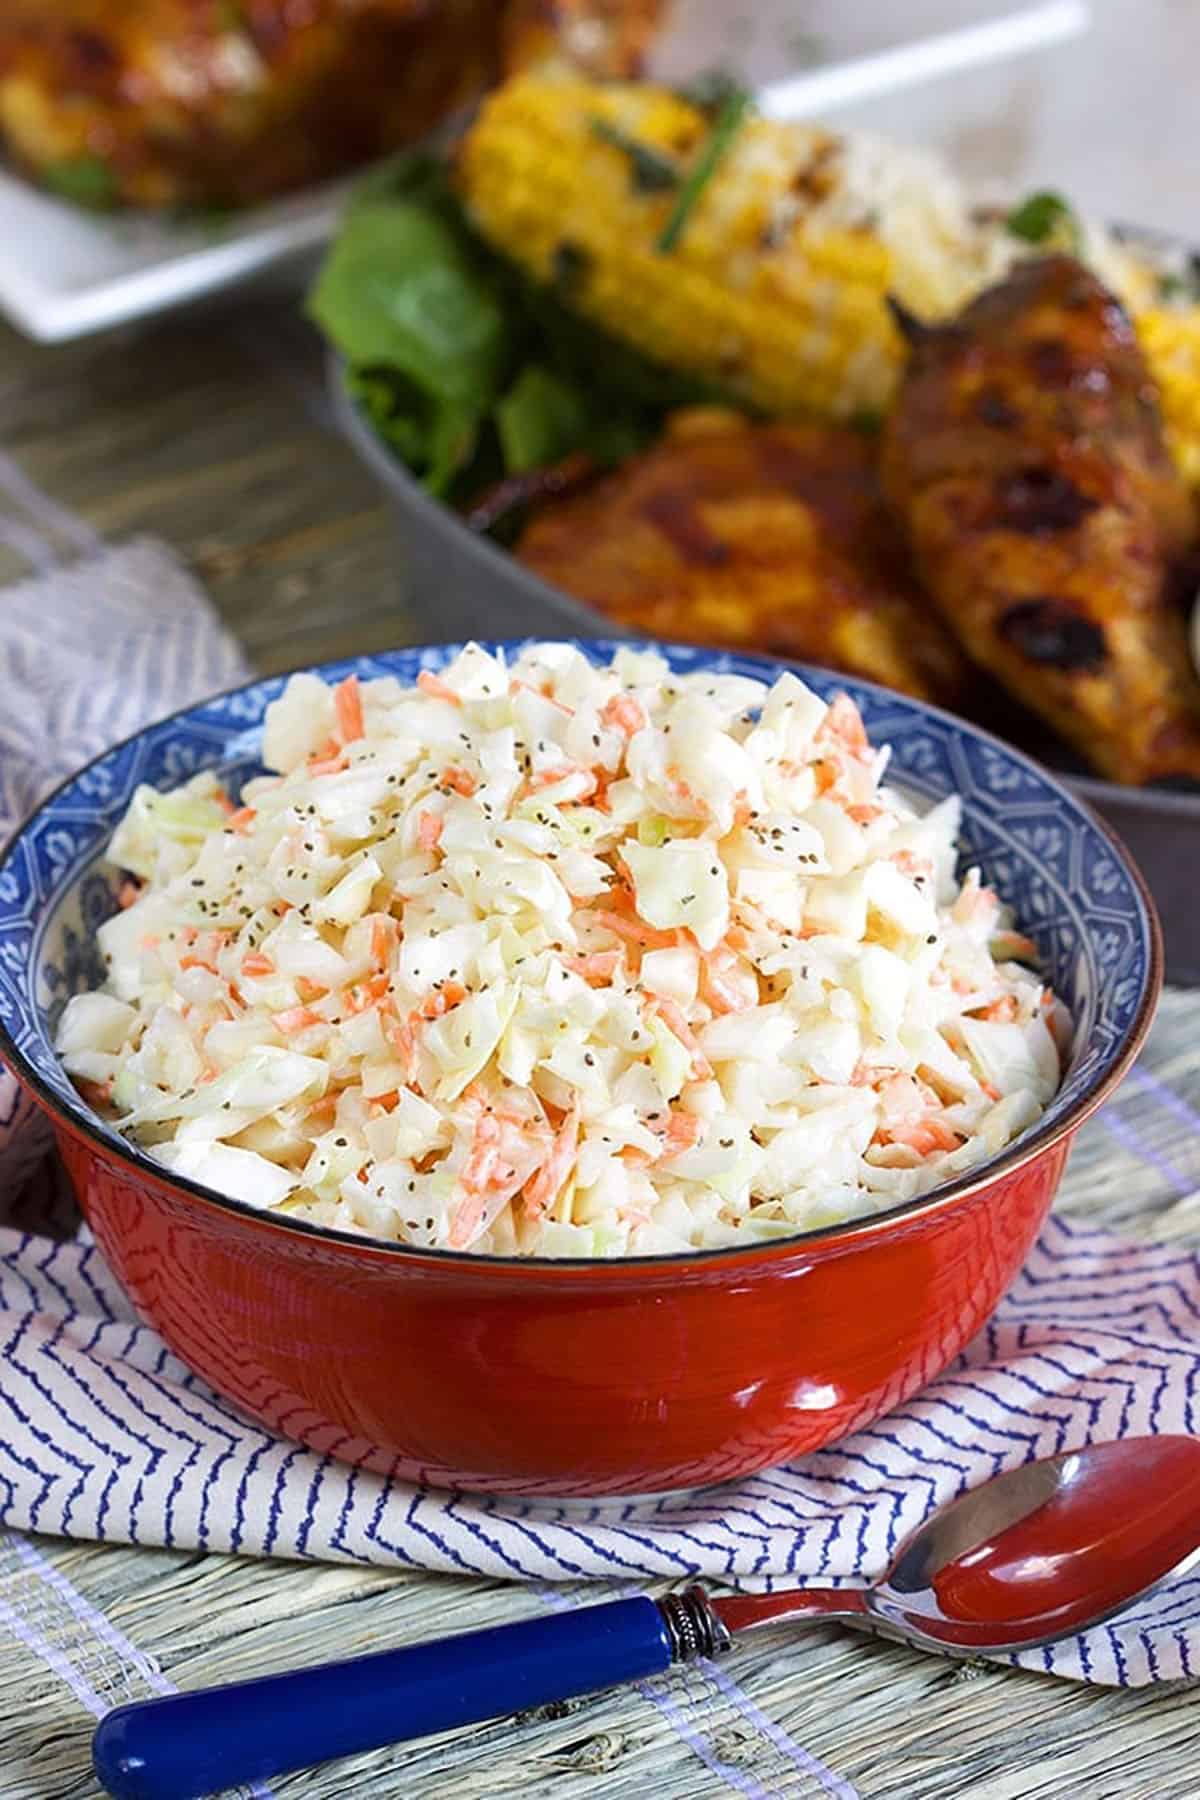 Coleslaw in a red bowl with bbq chicken in the background.